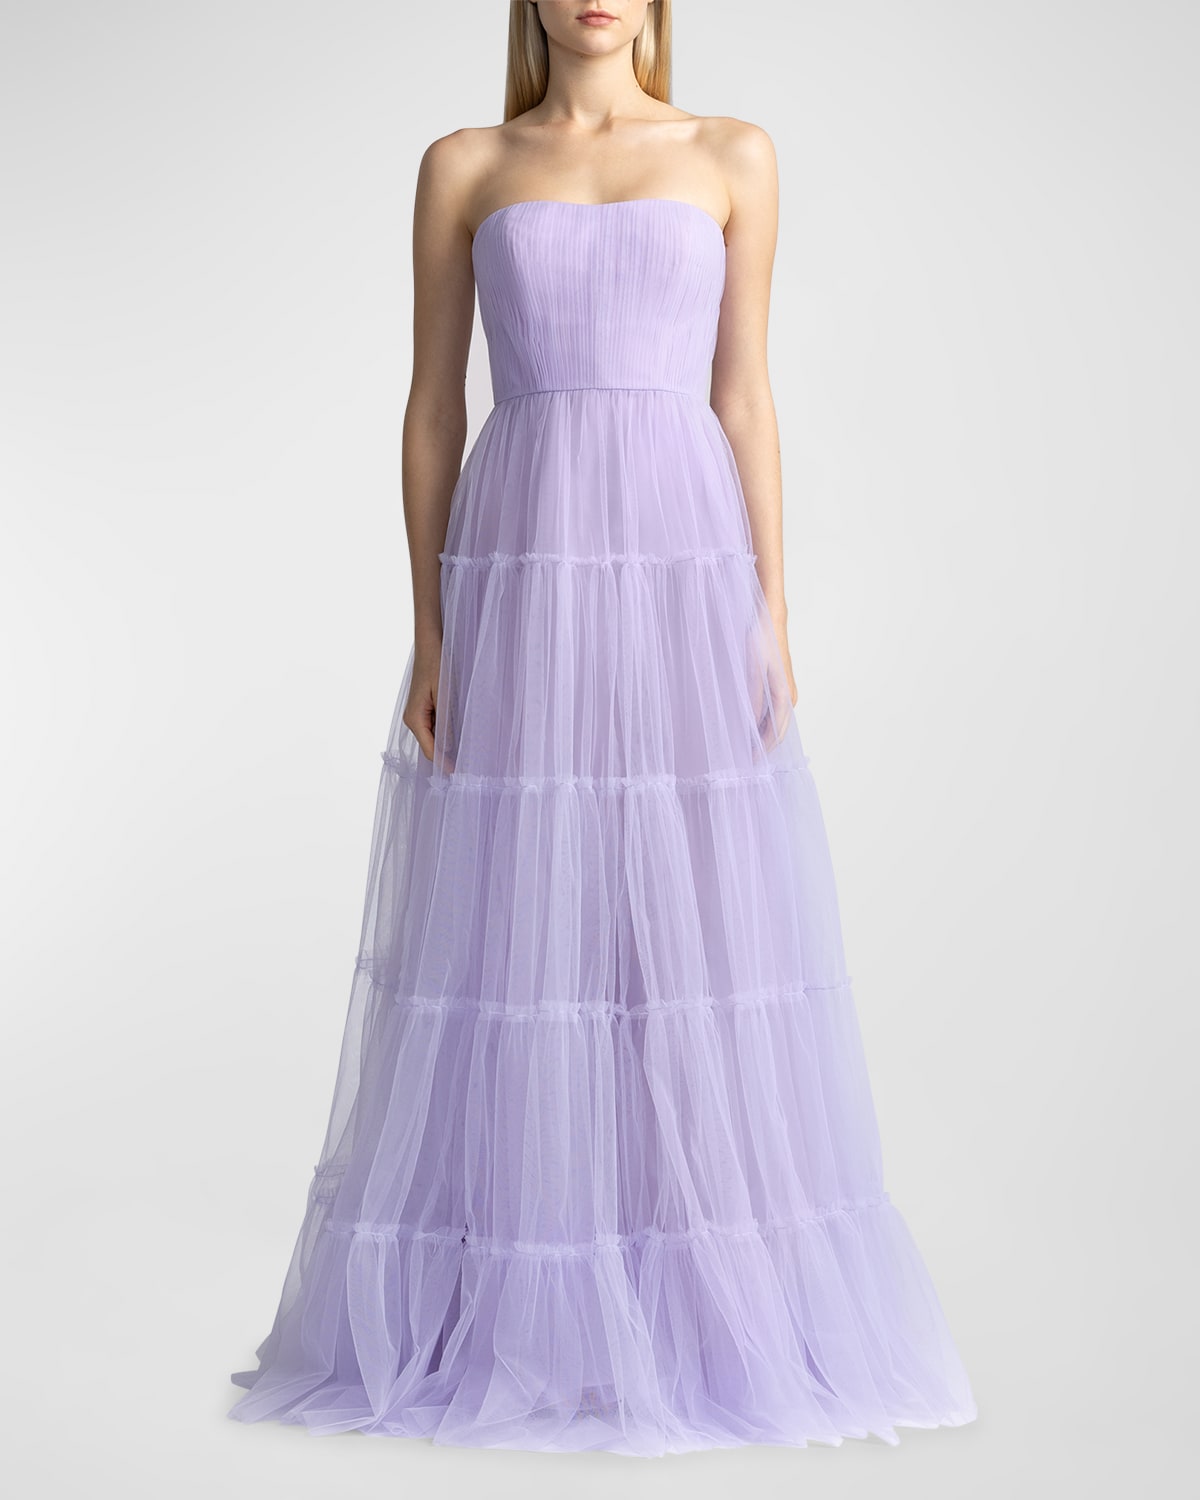 ZAC POSEN STRAPLESS TIERED A-LINE TULLE GOWN